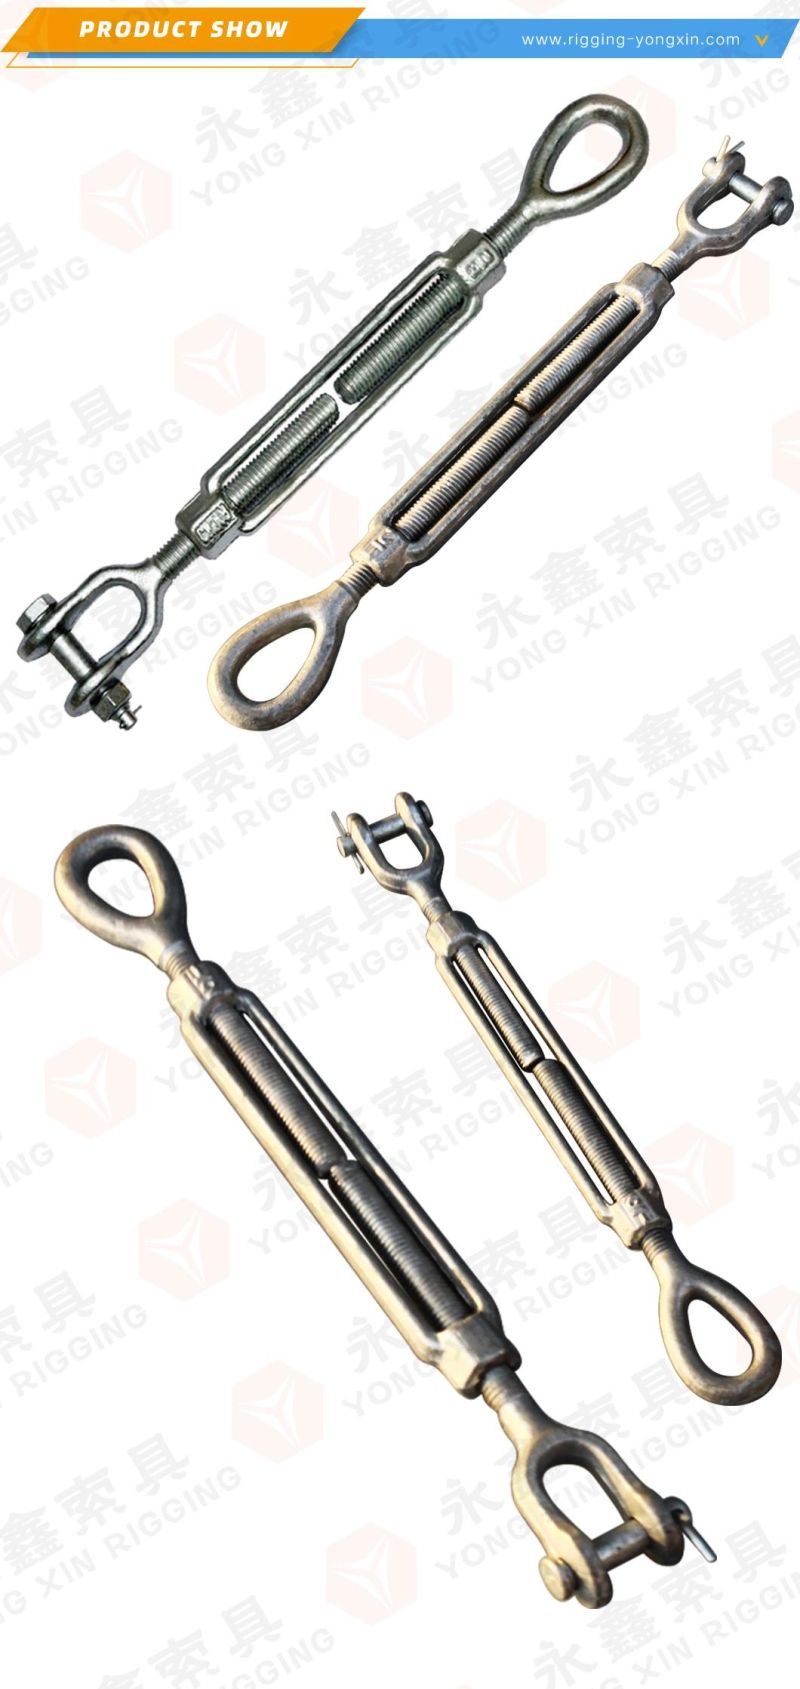 High Polished Stainless Steel Turnbuckle Body Rigging Hardware Stainless Steel Turnbuckles Eye Jaw